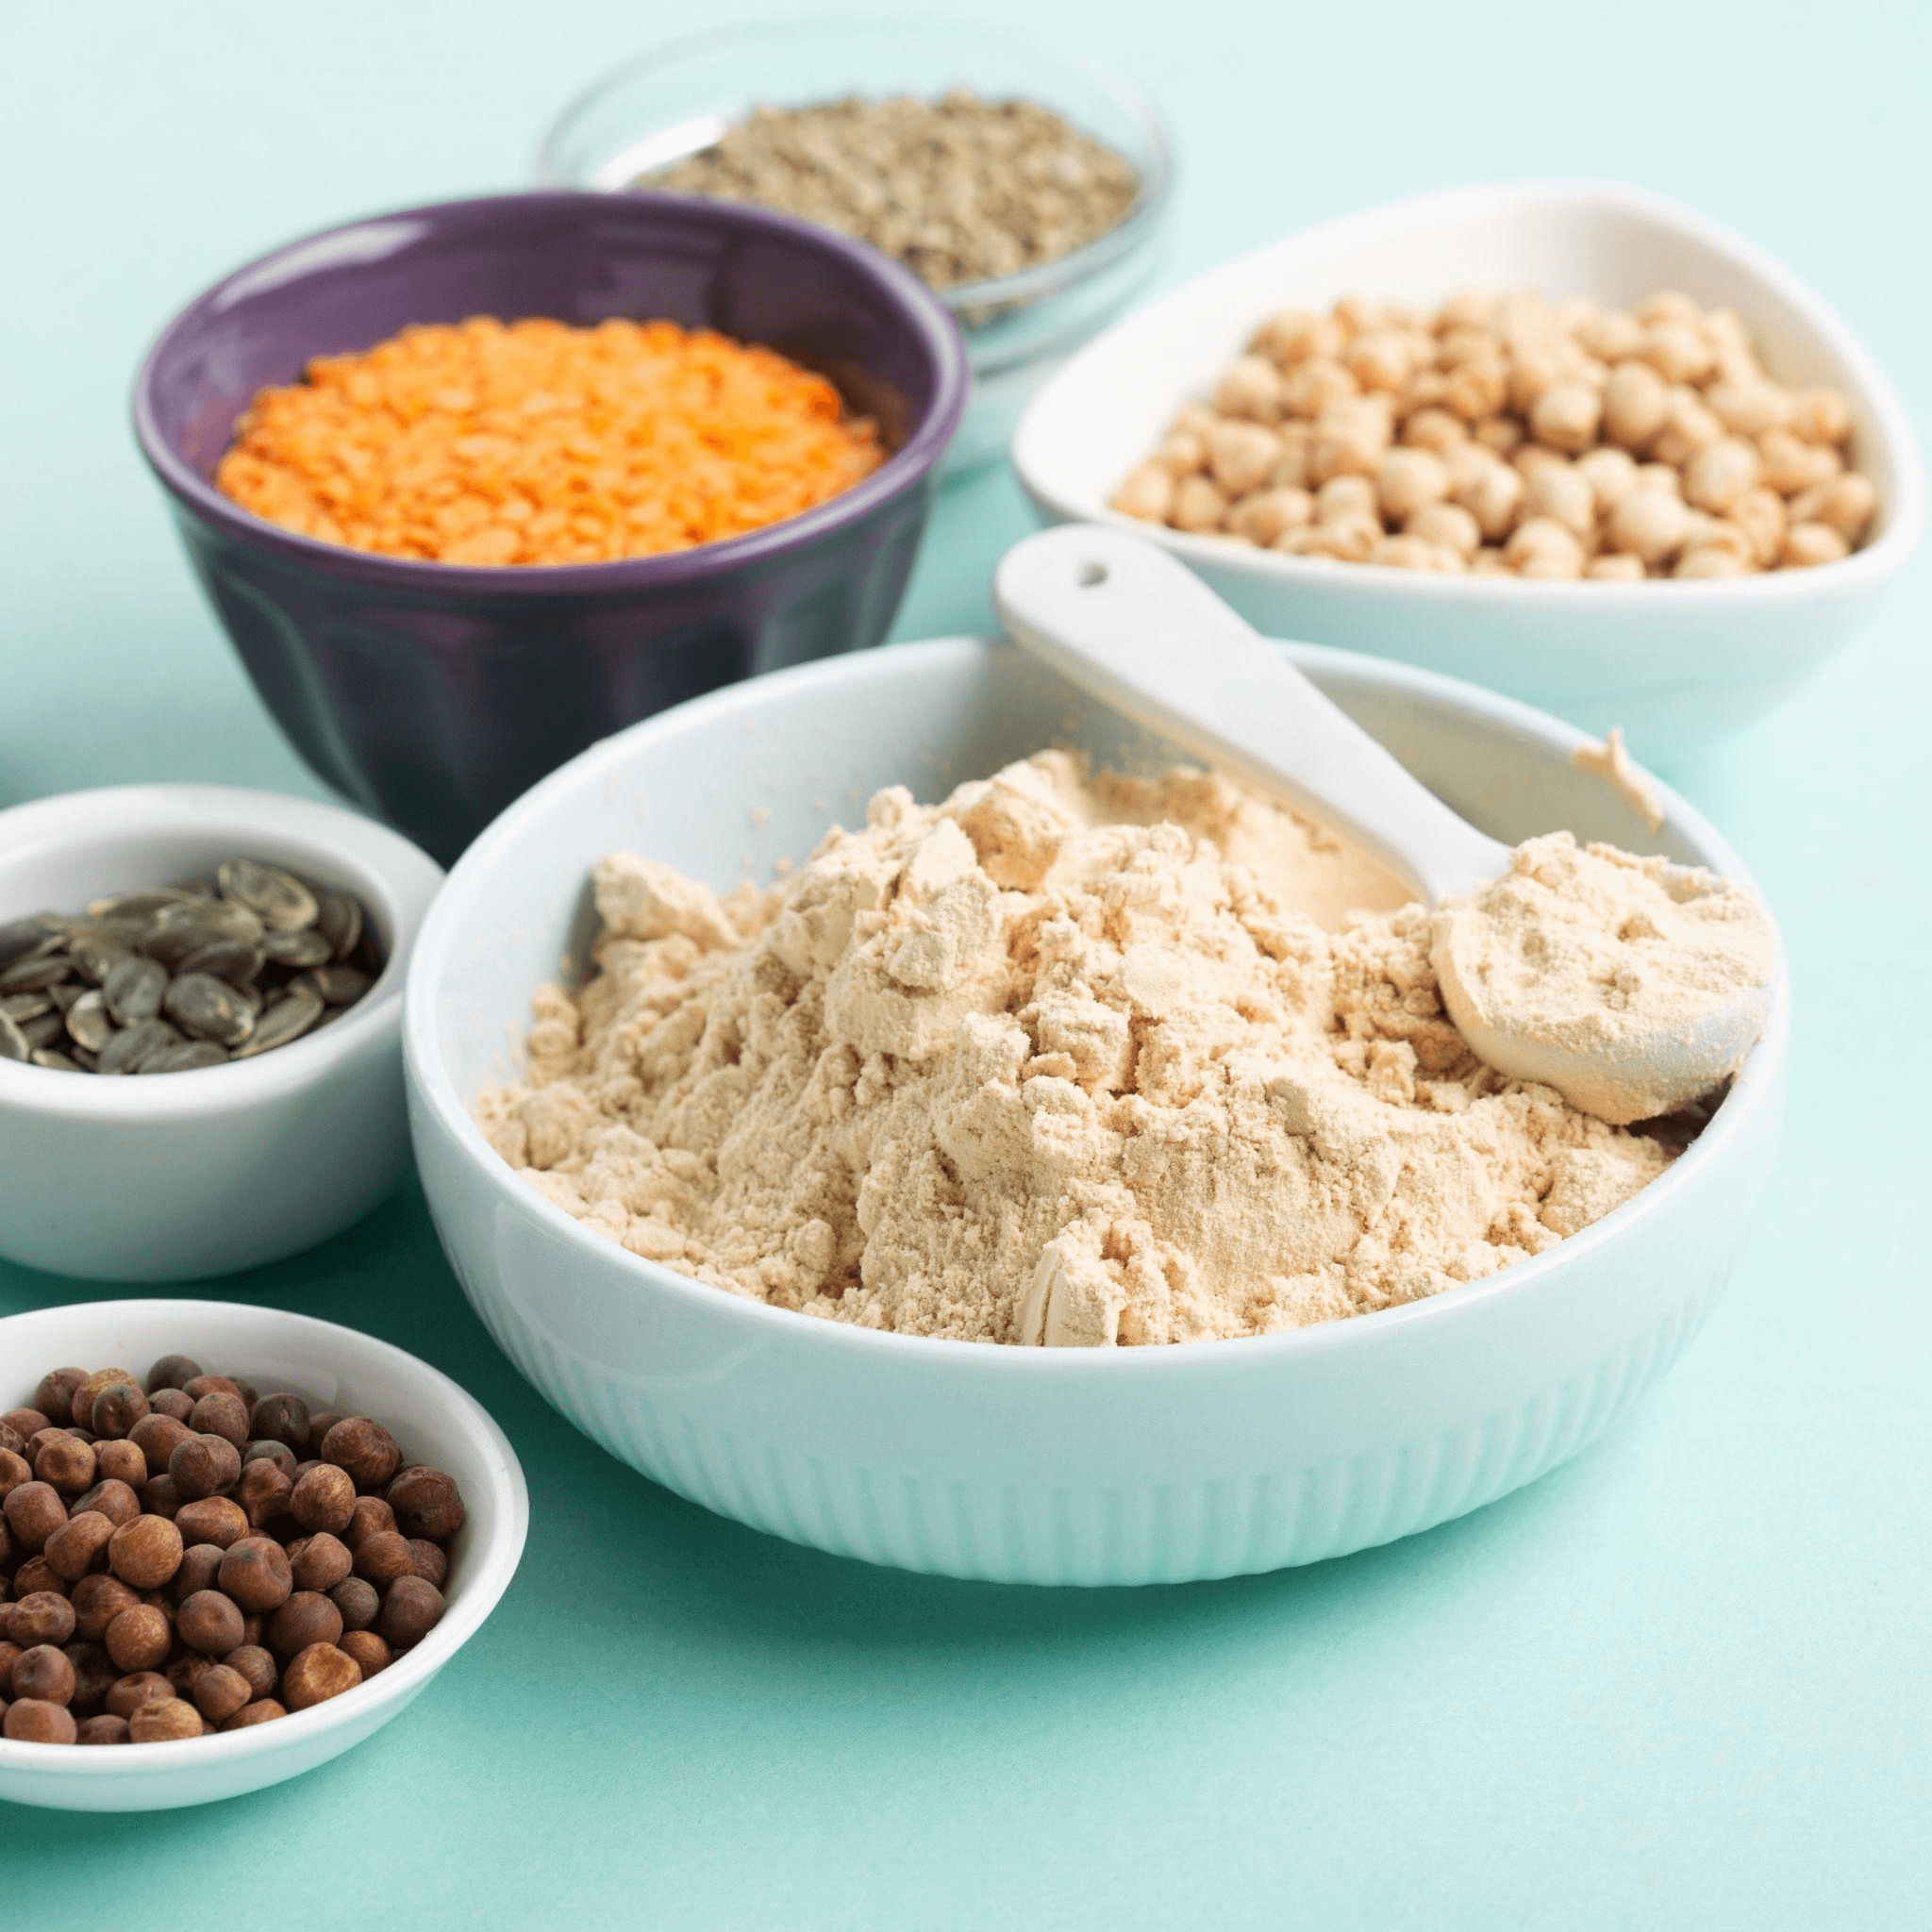 What Are Vegan Protein Powders?